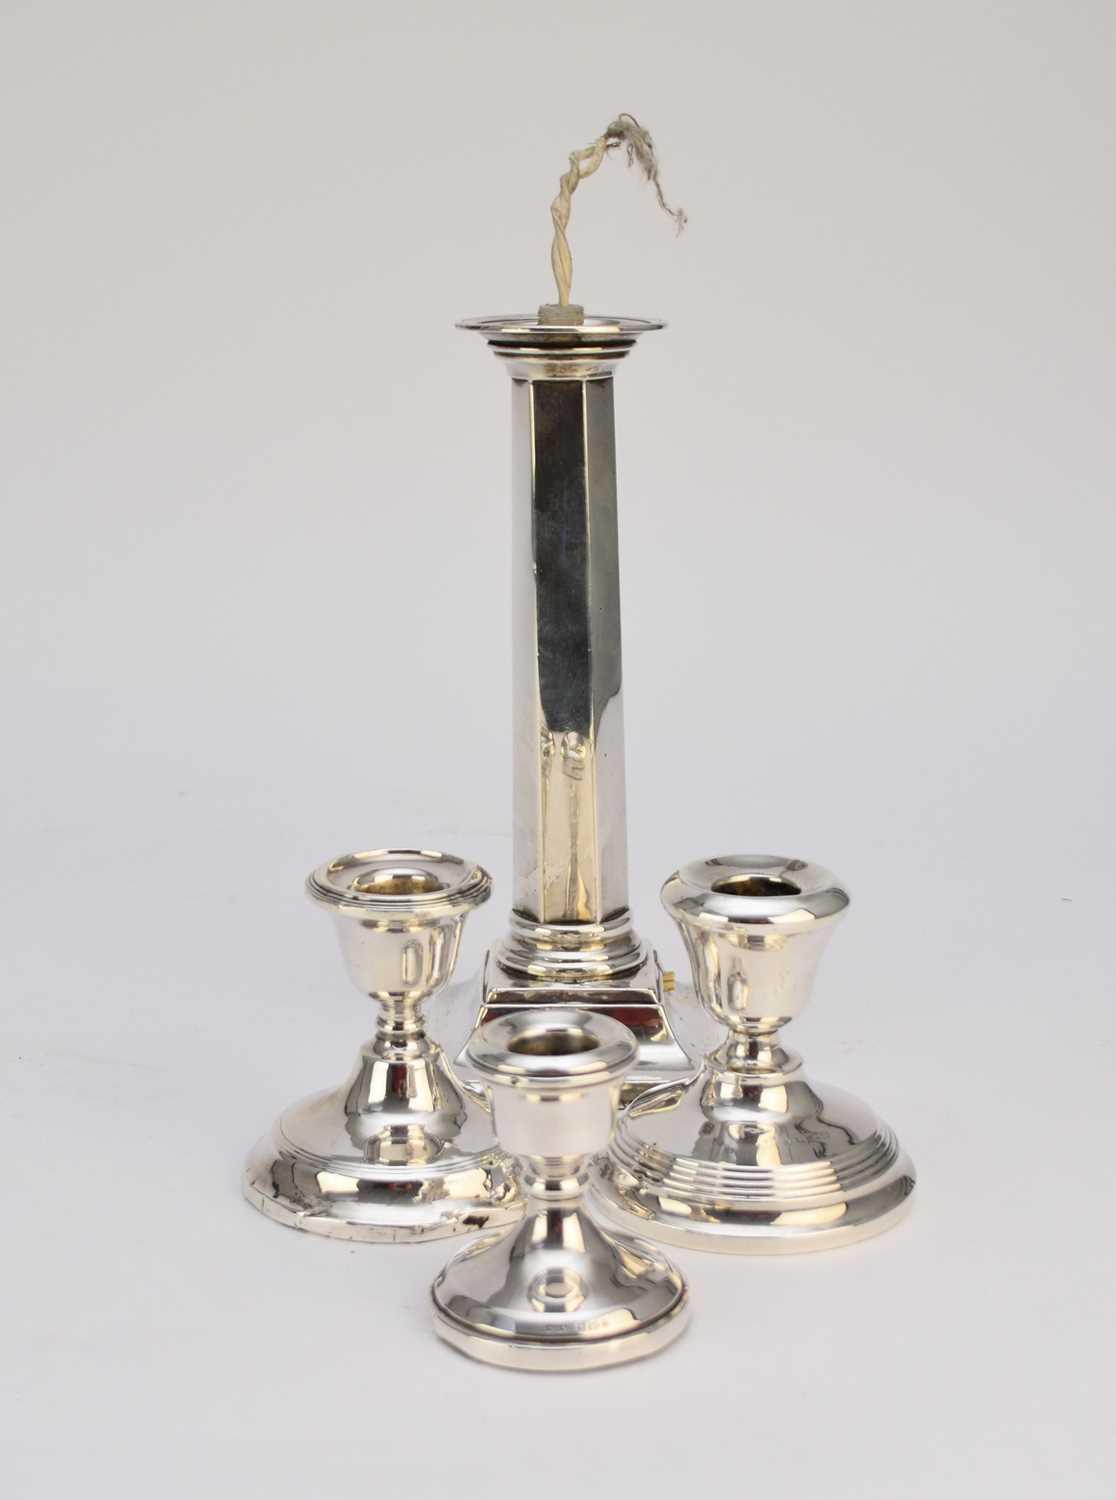 A silver mounted lamp base and three candlesticks